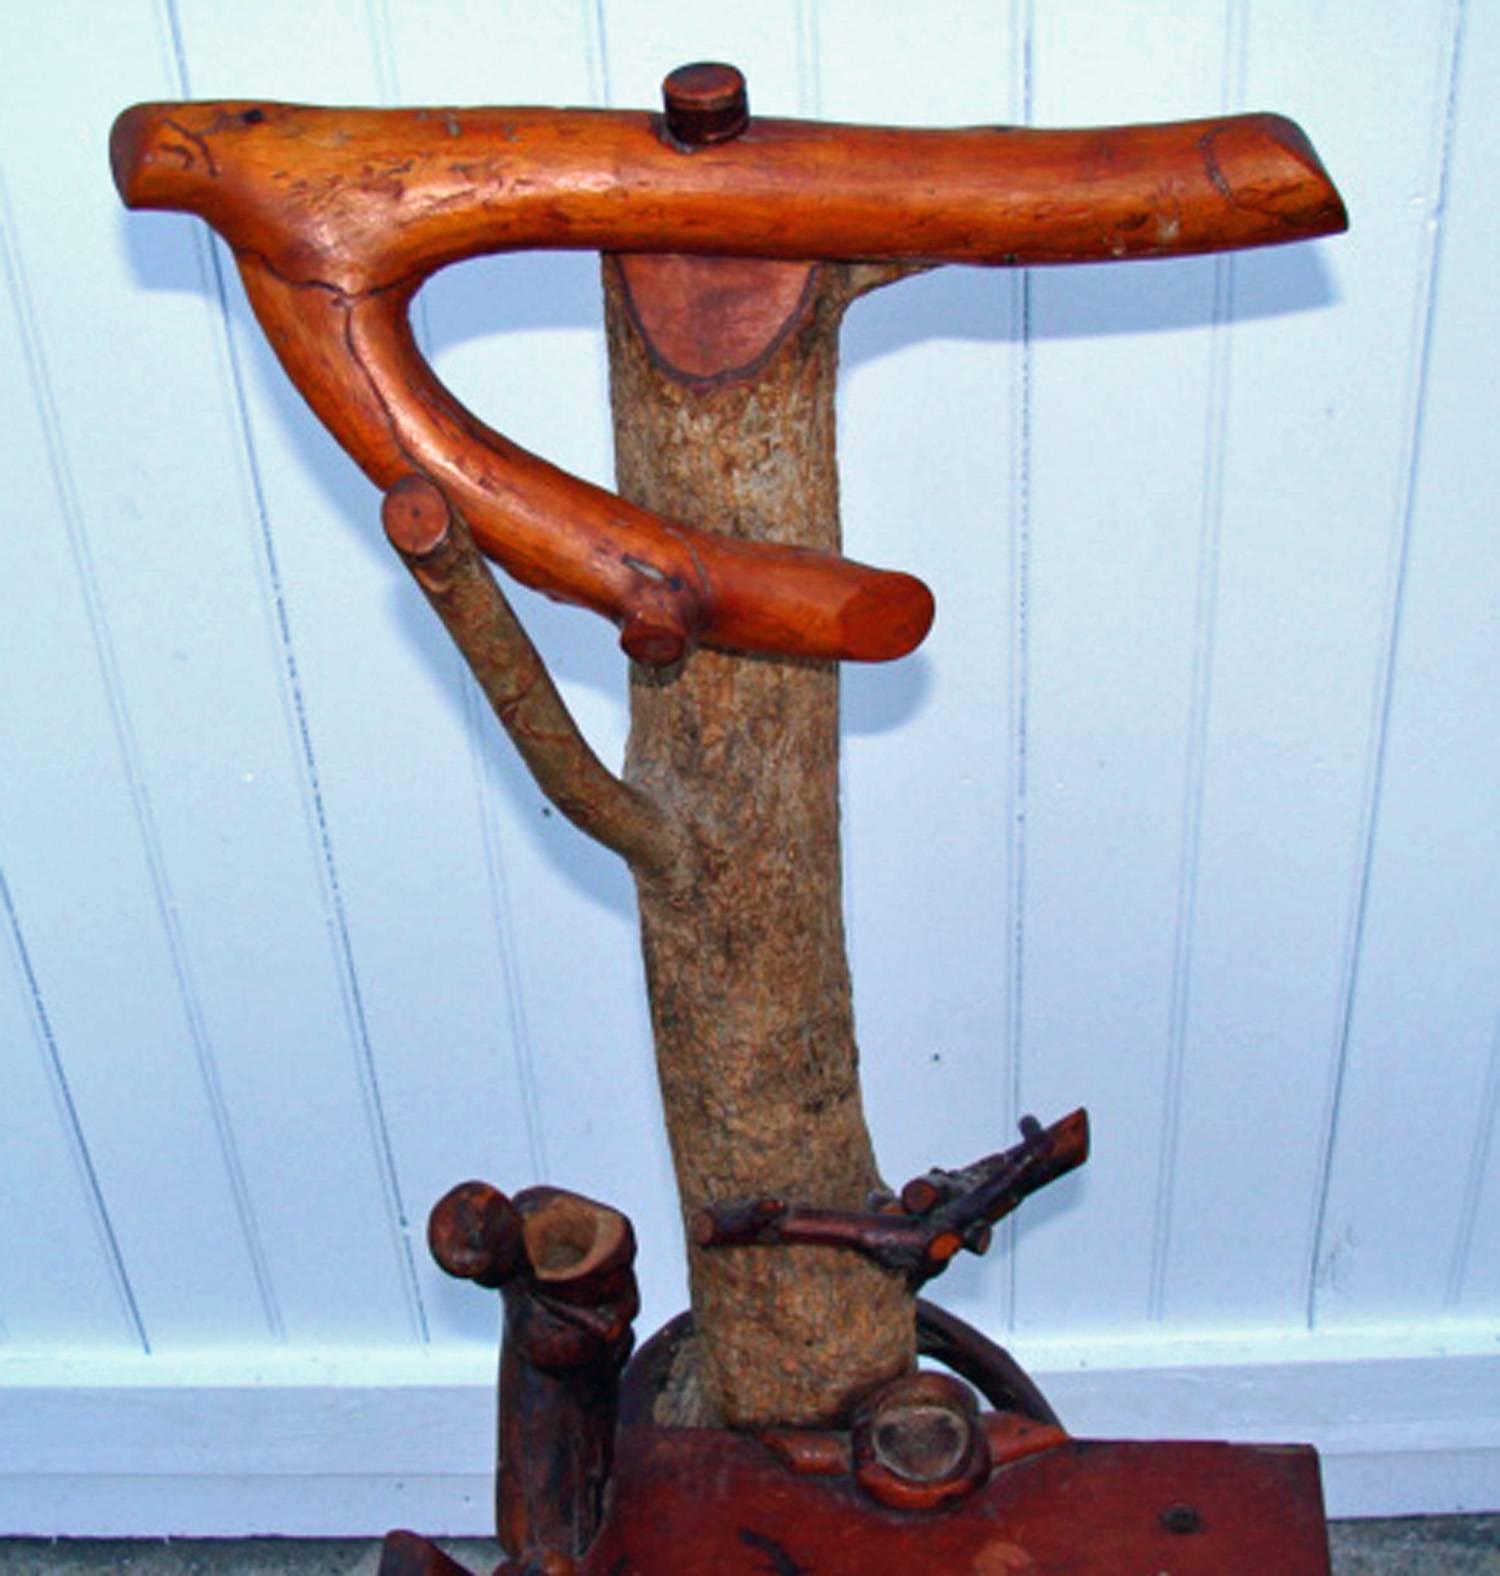 Wonderful expressive stand usable as a valet stand or drink stand or side table. Originally crafted in the early 20th century.

Wood limbs with traces of old paint. Has nice antique patina overall.